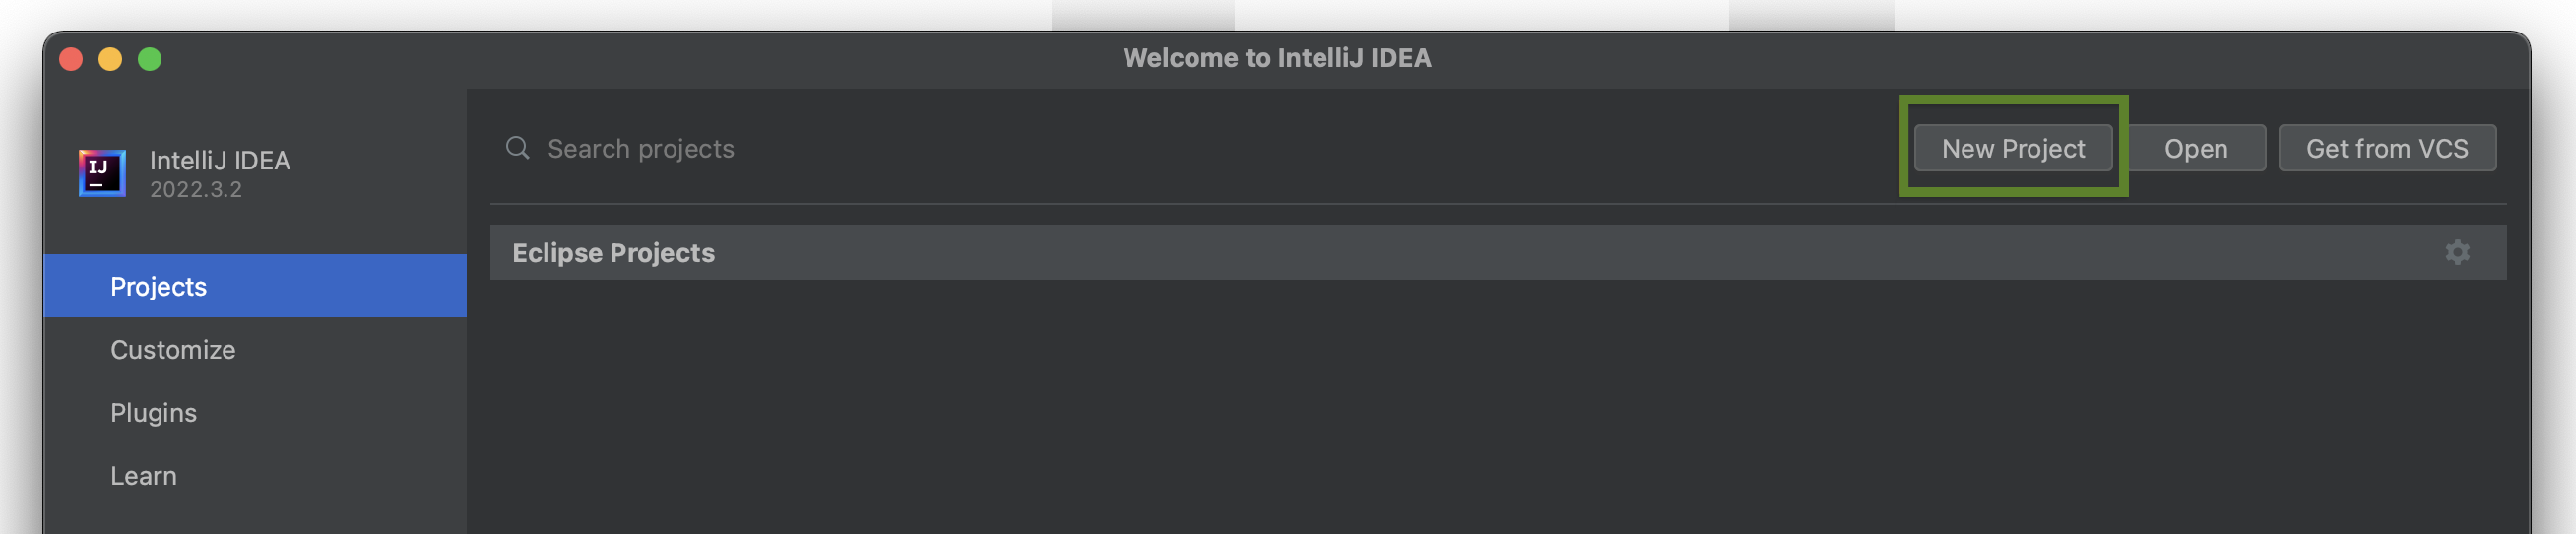 The IntelliJ UI with the New Project button highlighted.